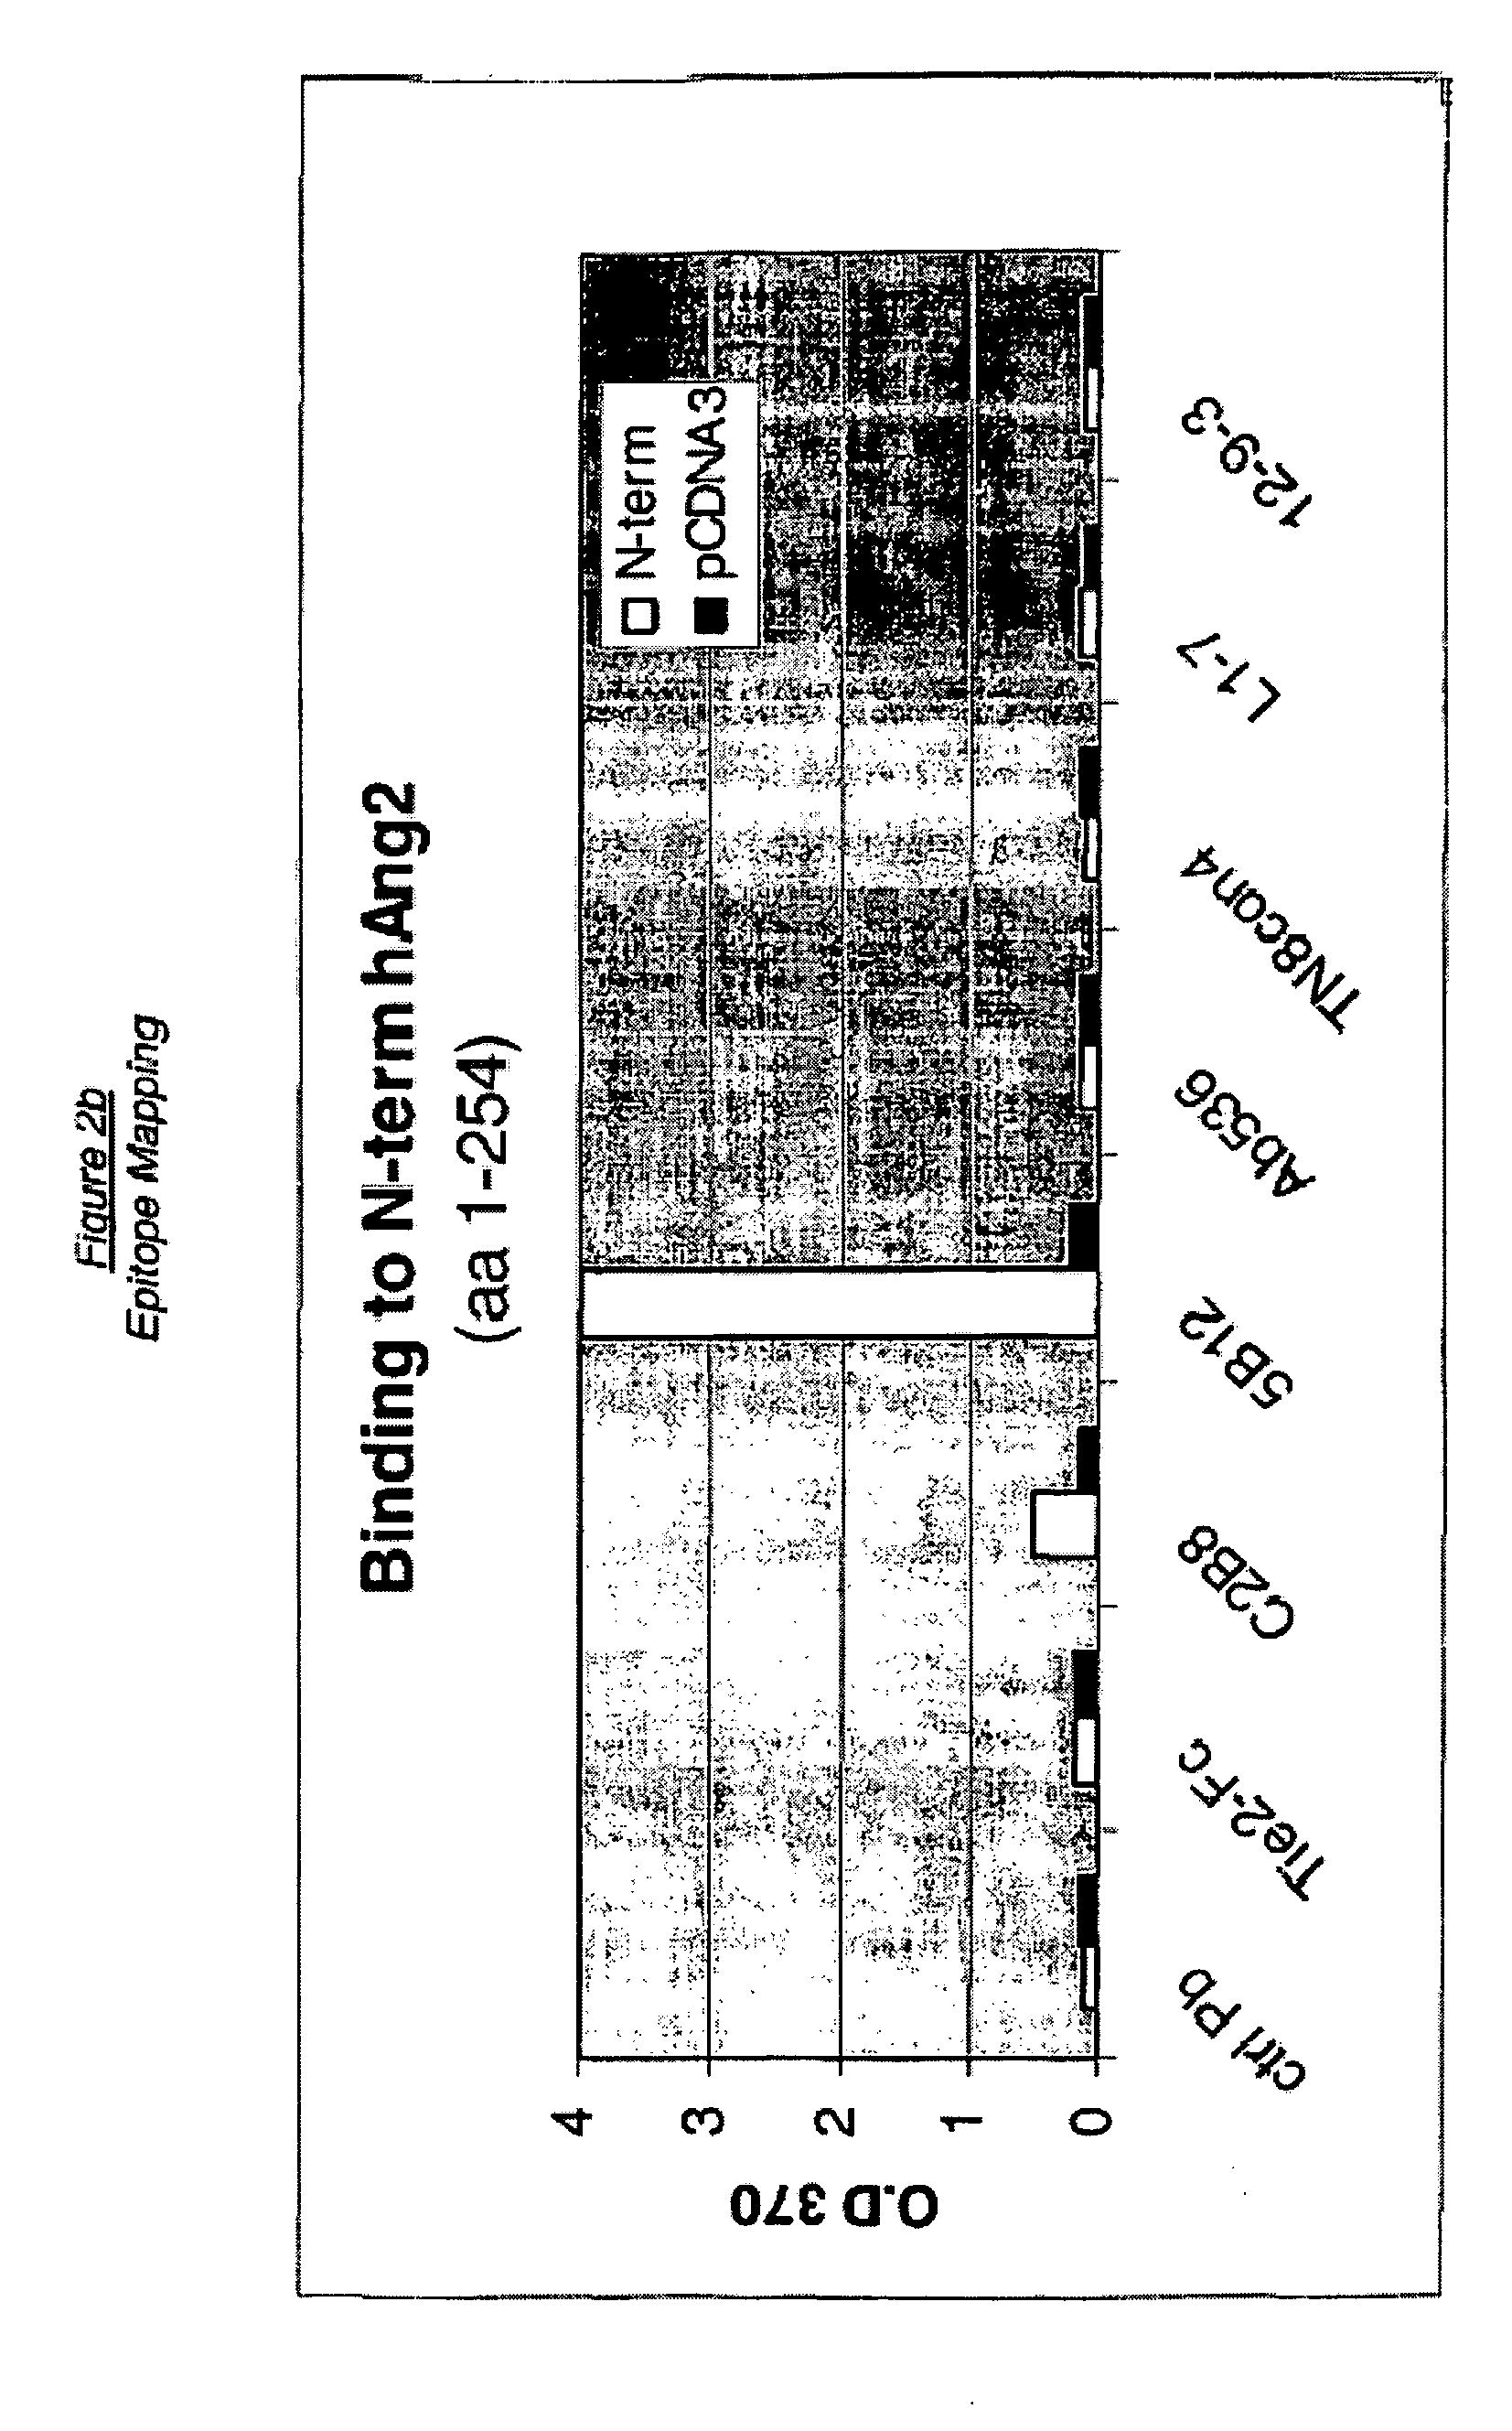 Angiopoietin-2 specific binding agents